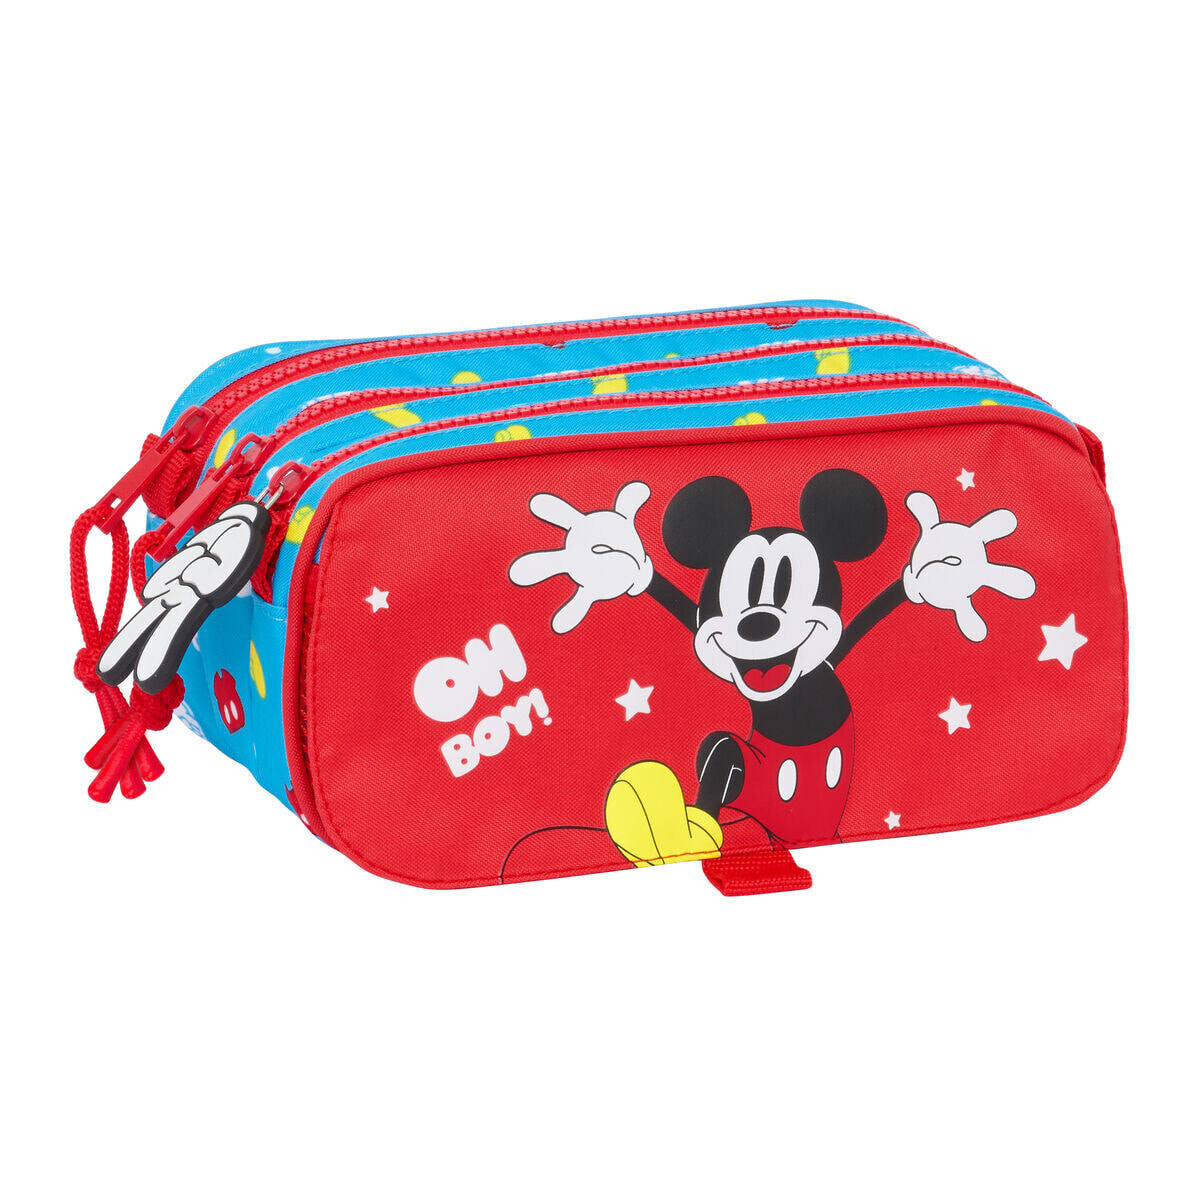 Double Carry-all Mickey Mouse Clubhouse Fantastic Blue Red 21,5 x 10 x 8 cm